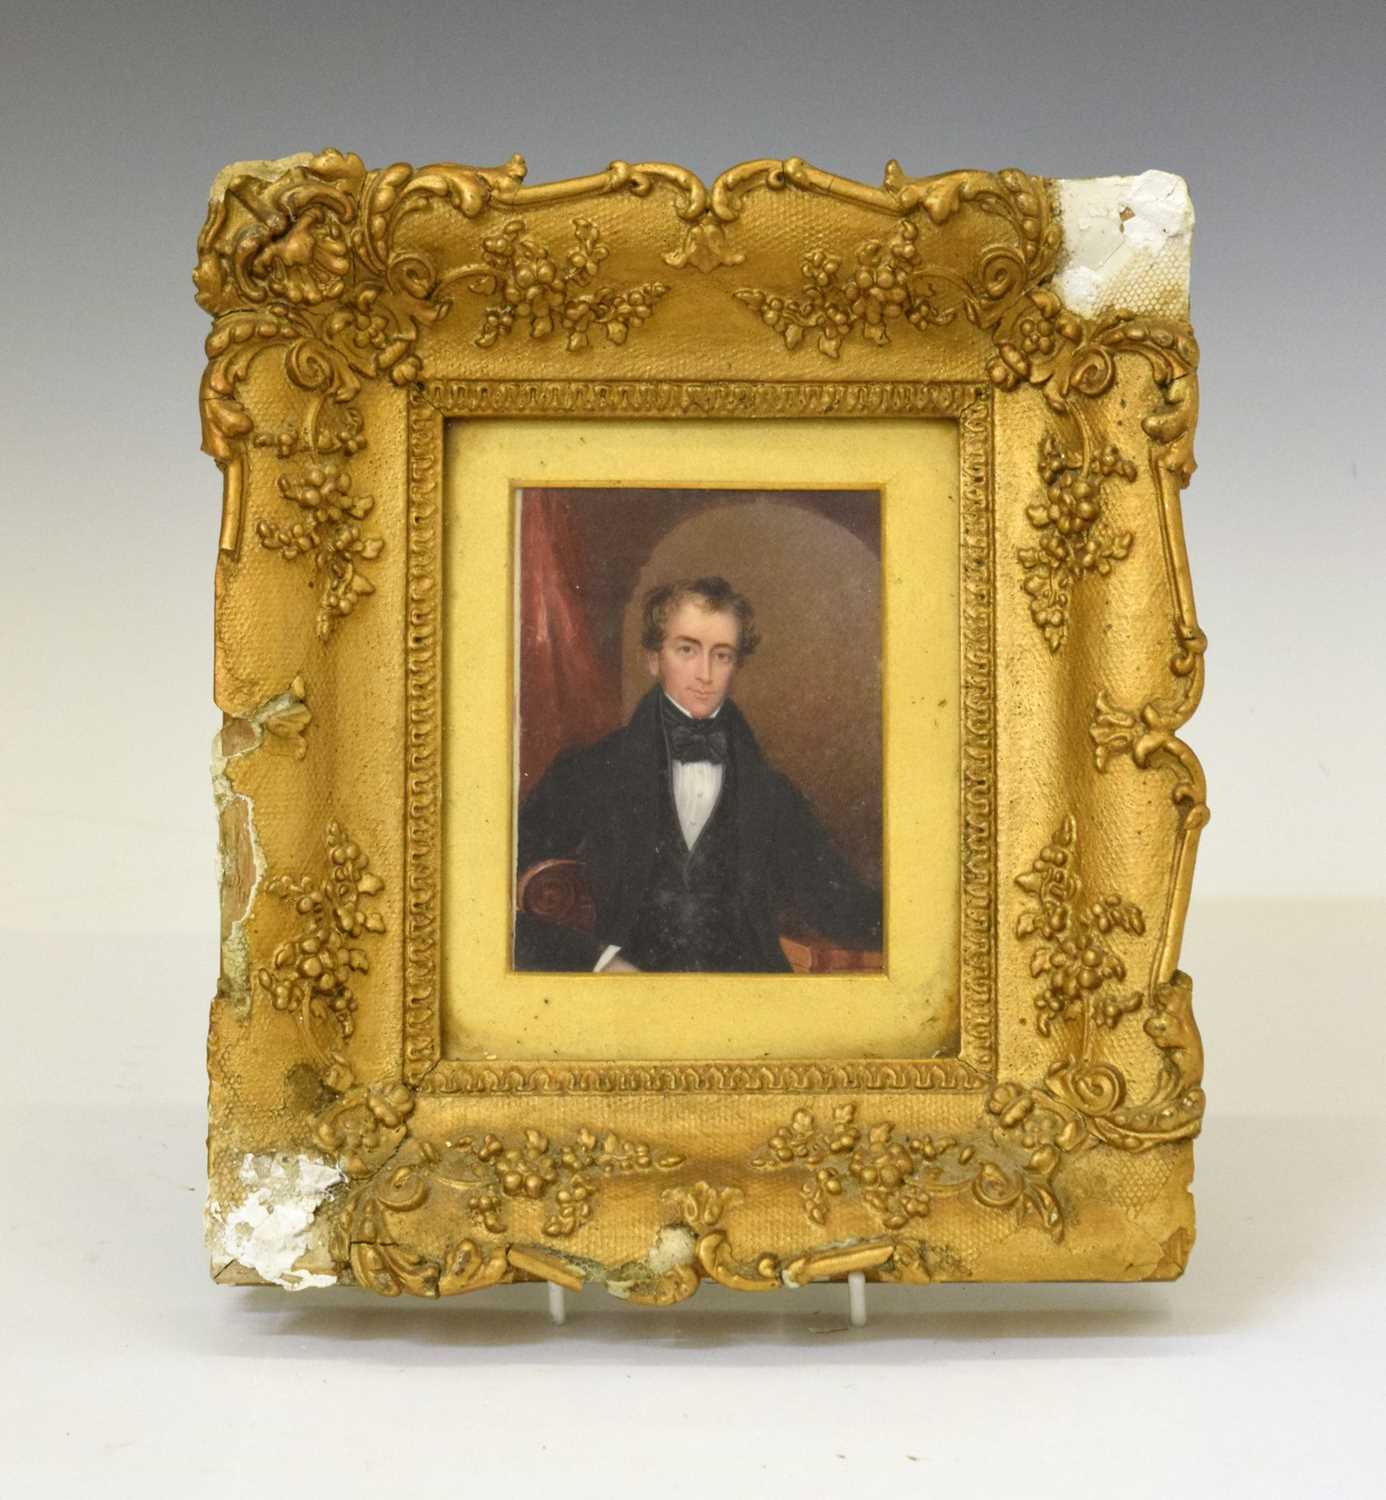 Attributed to William Hudson, (1803-1846) - Miniature portrait on ivory of a gentleman